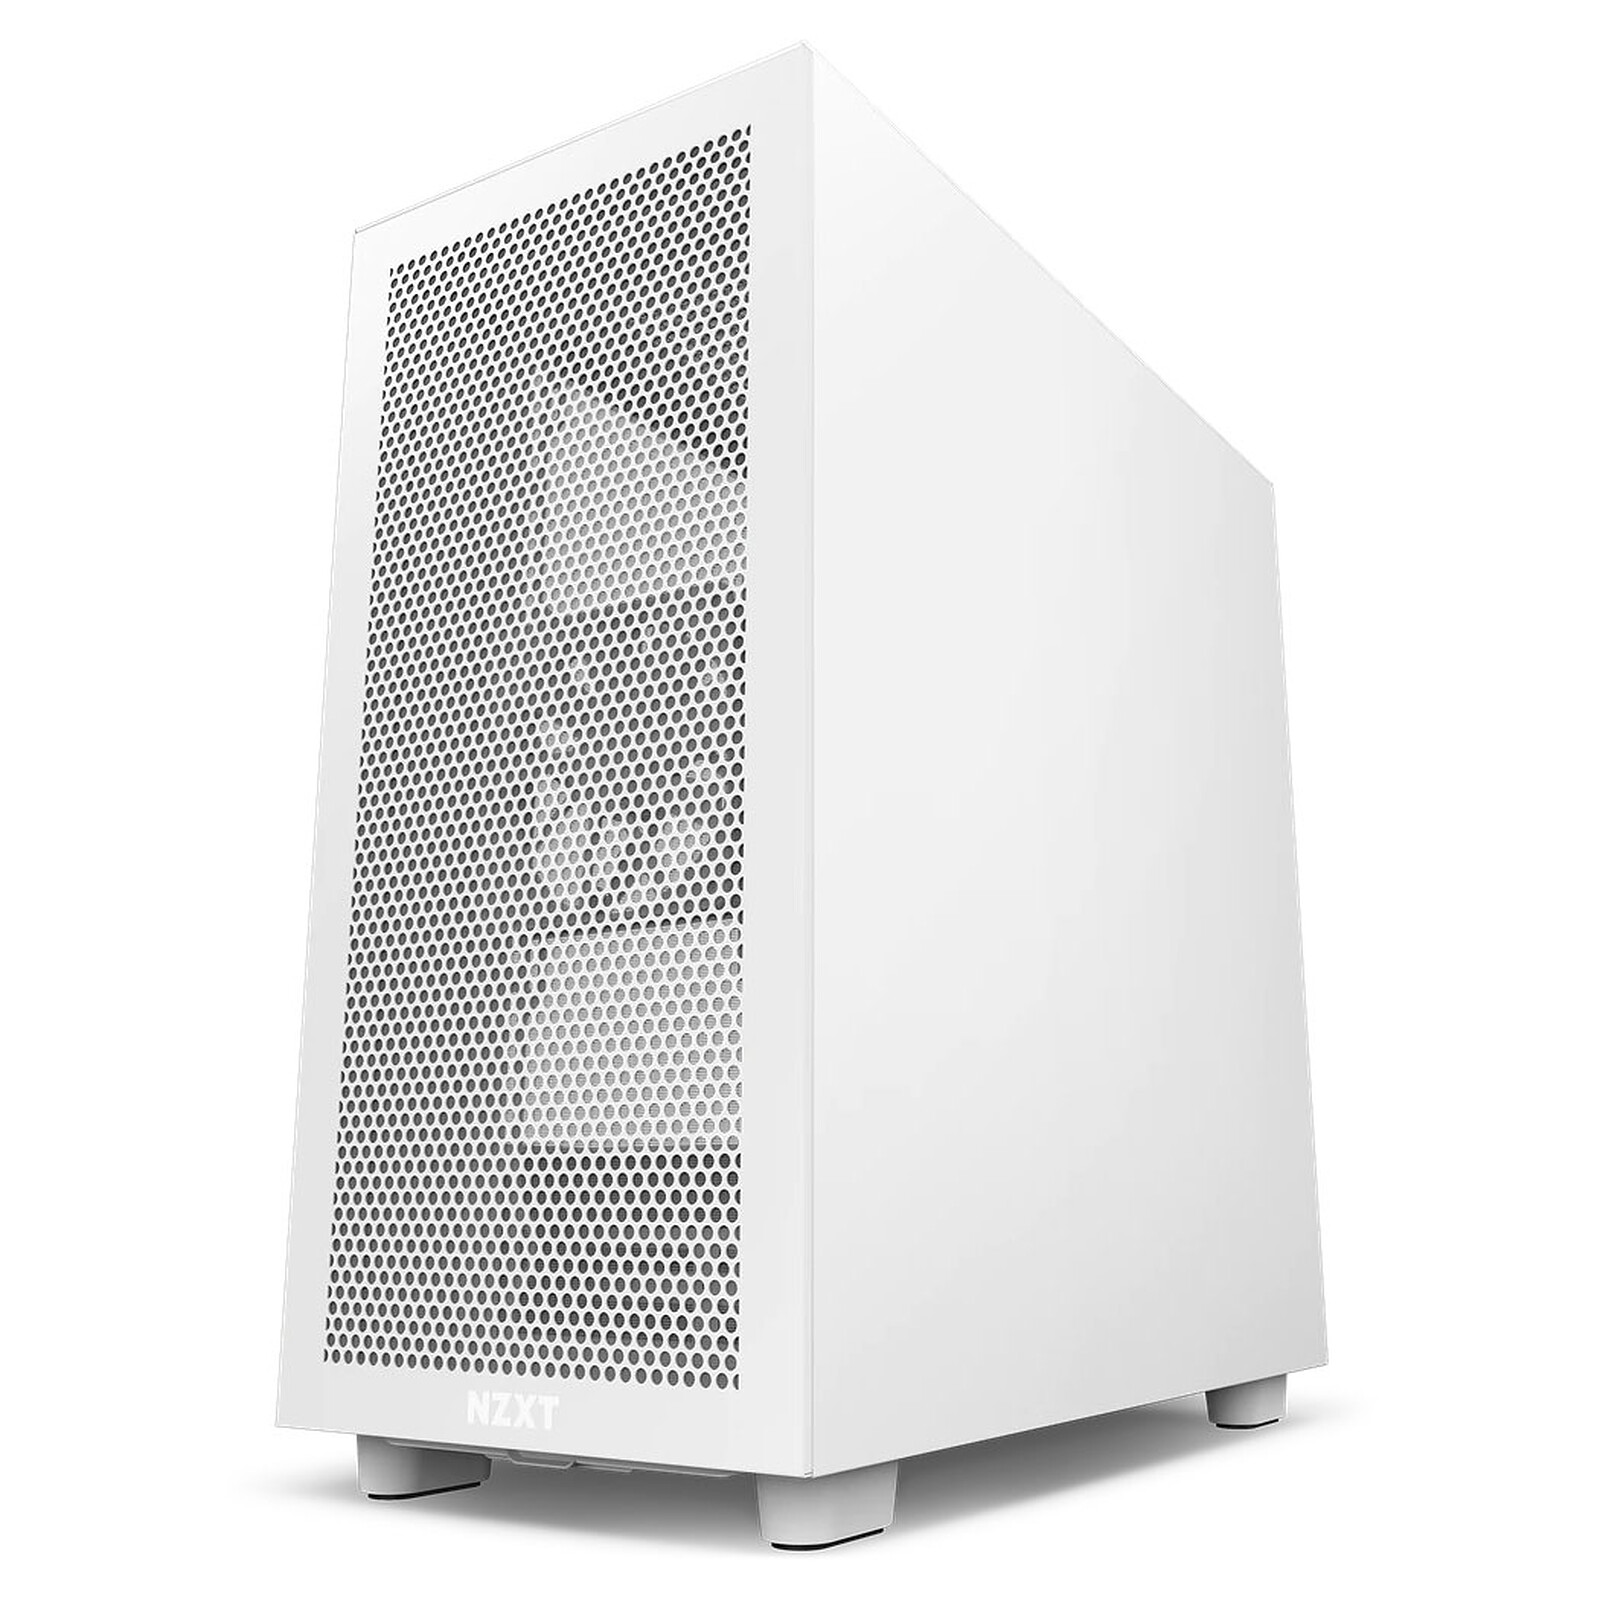 NZXT H7 Flow White - PC cases - LDLC 3-year warranty